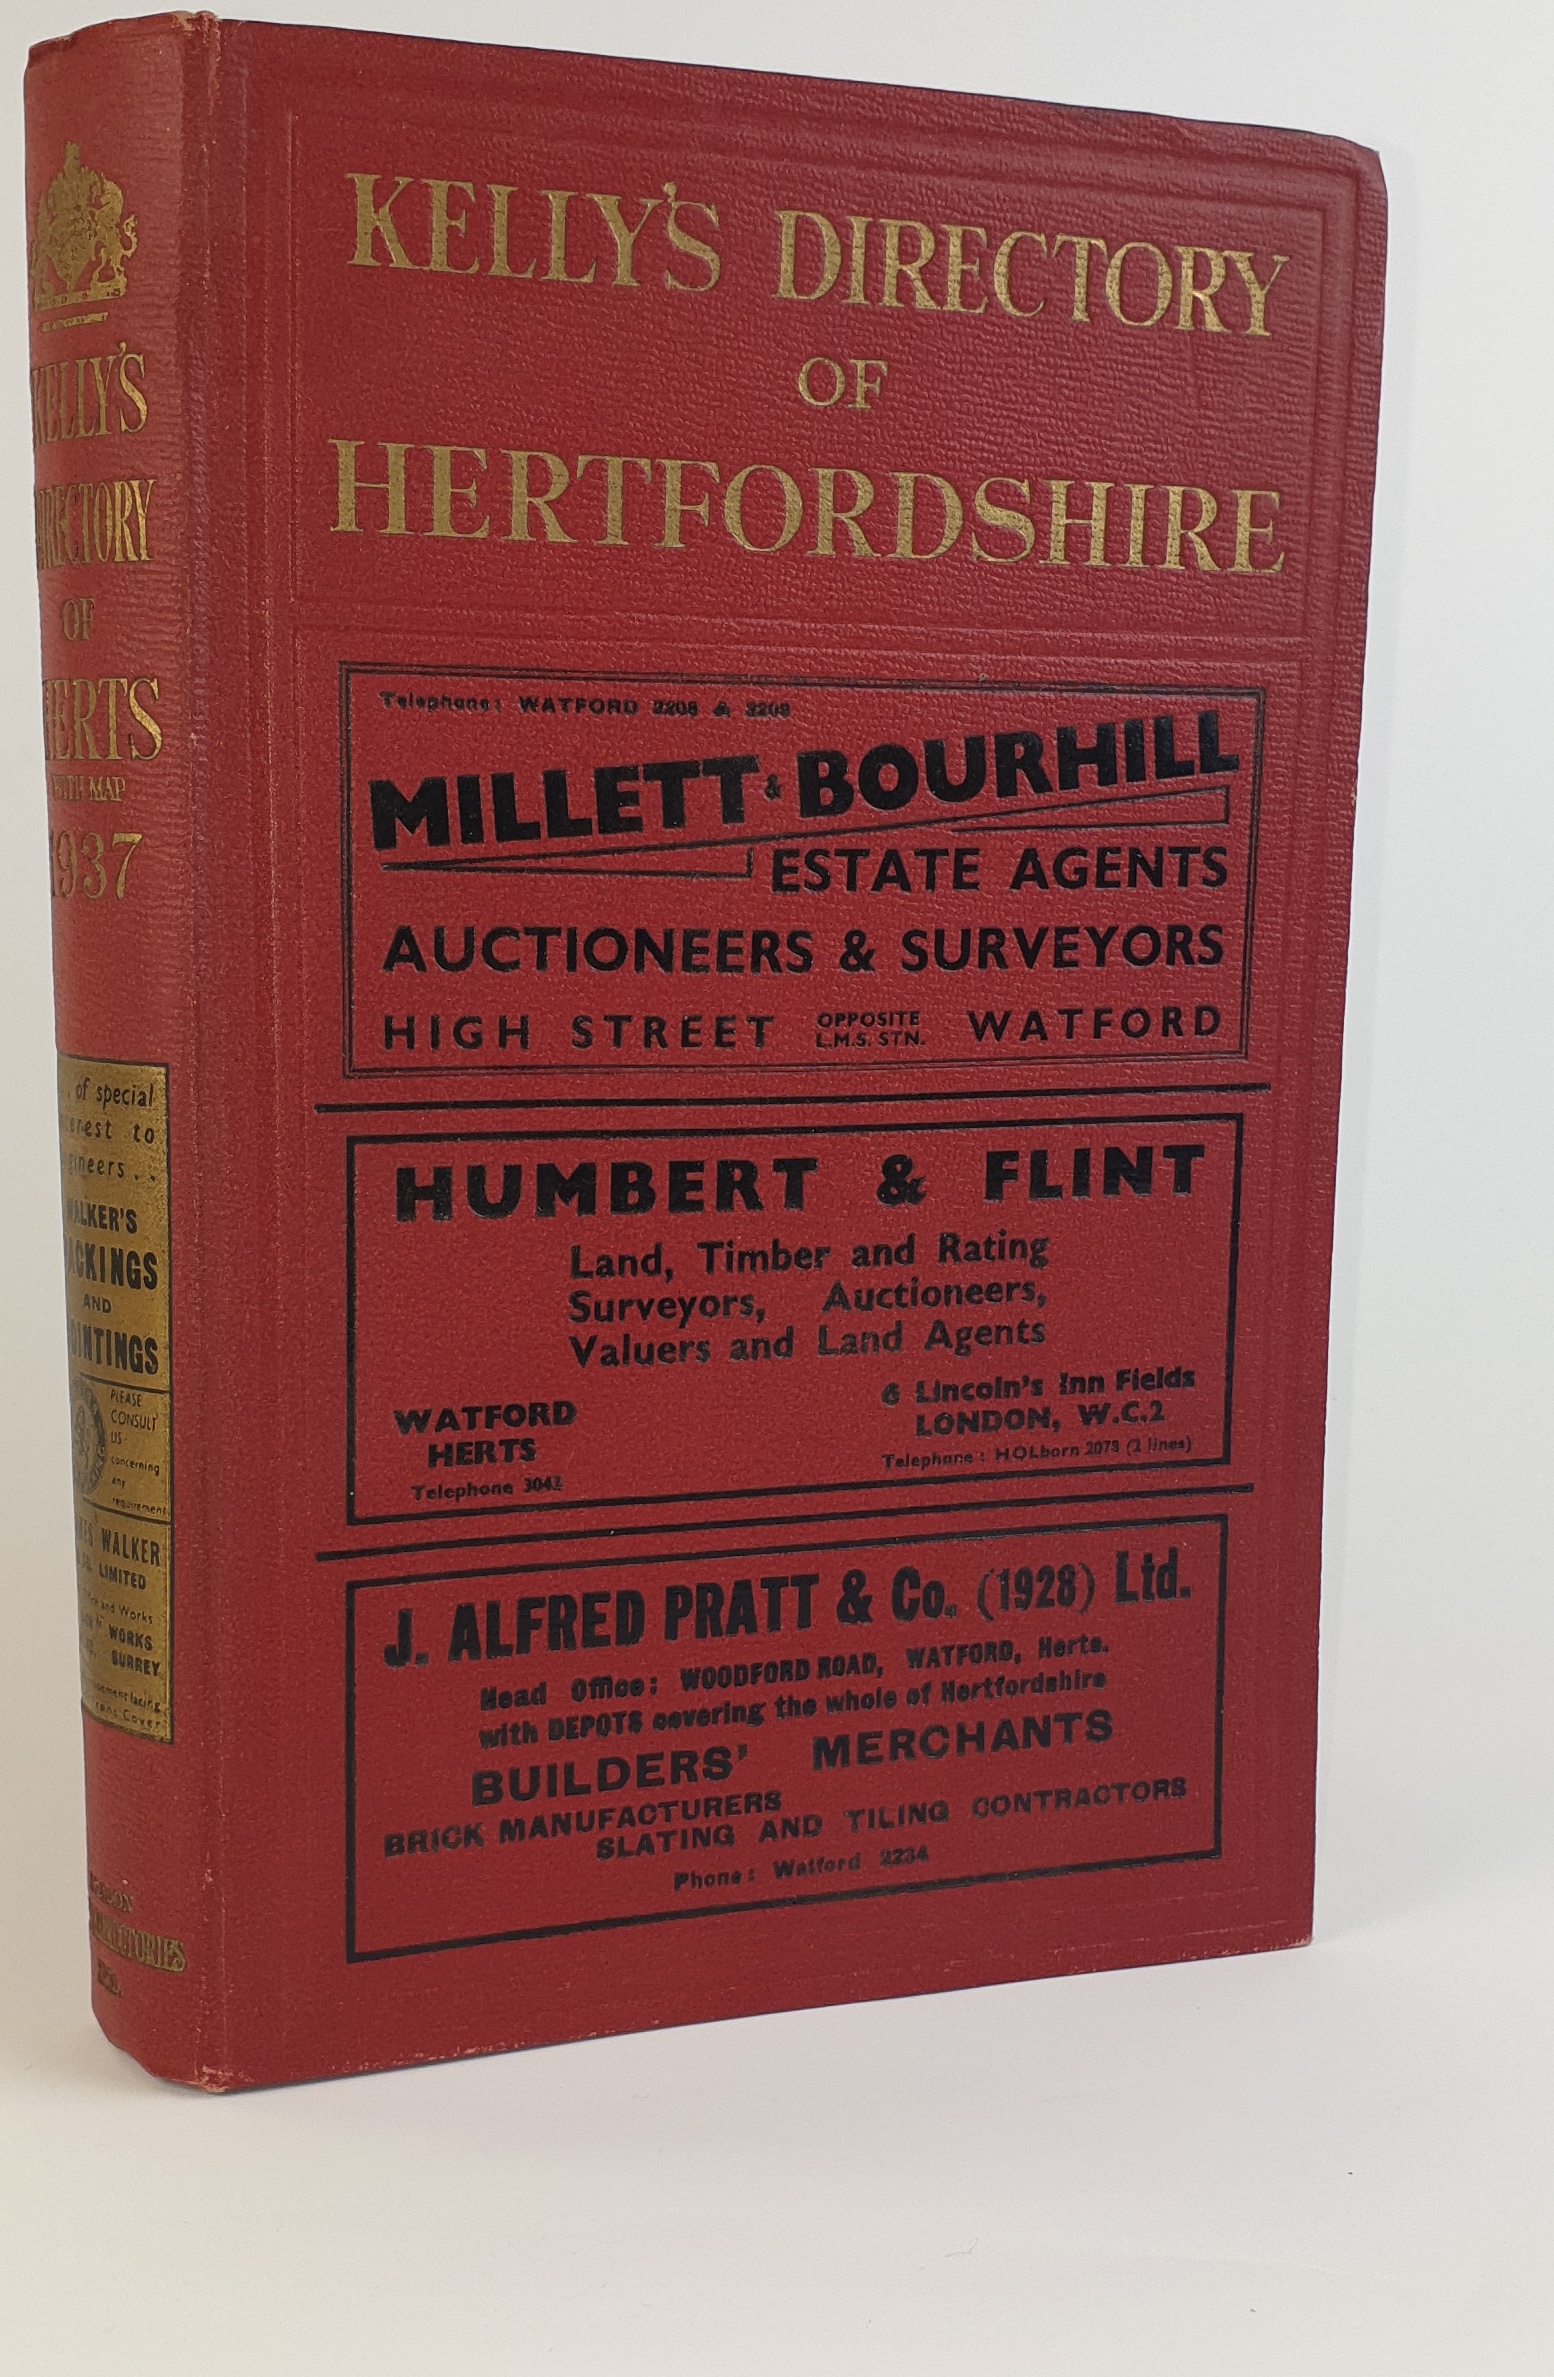 Kelly's Directory of Hertfordshire 1937